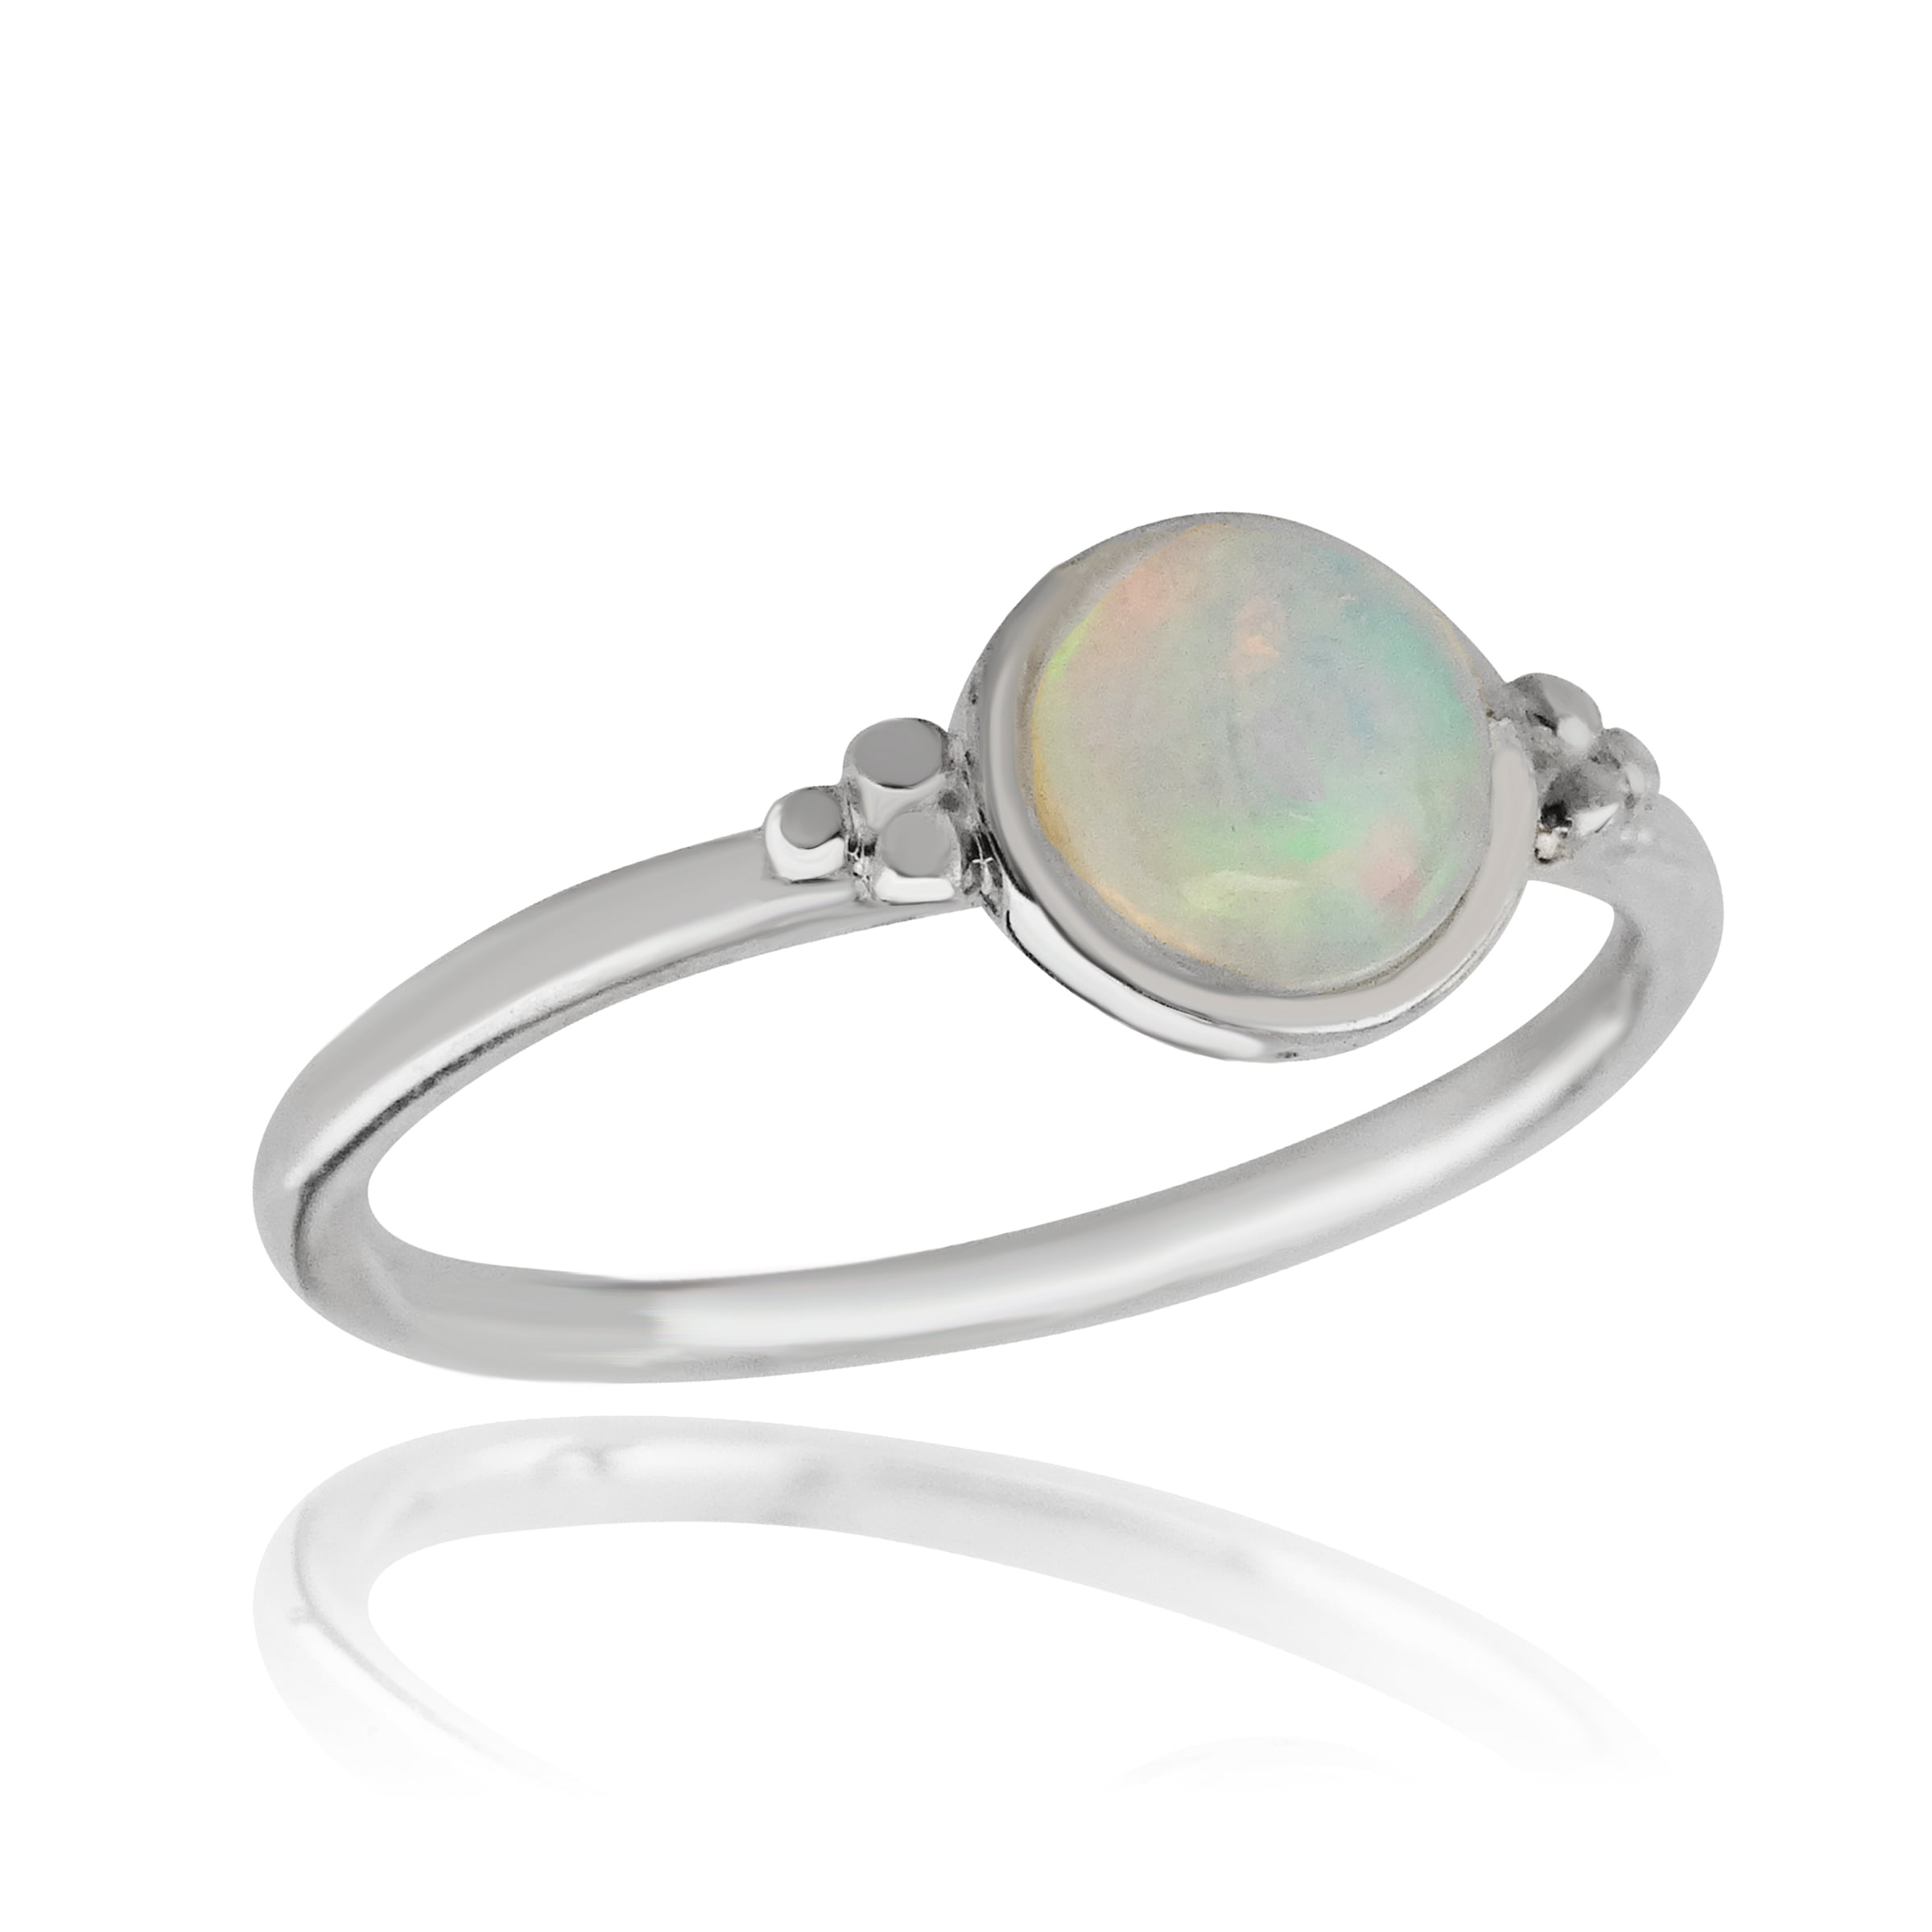 White Opal .925 Sterling Silver Ring sizes 6-9 